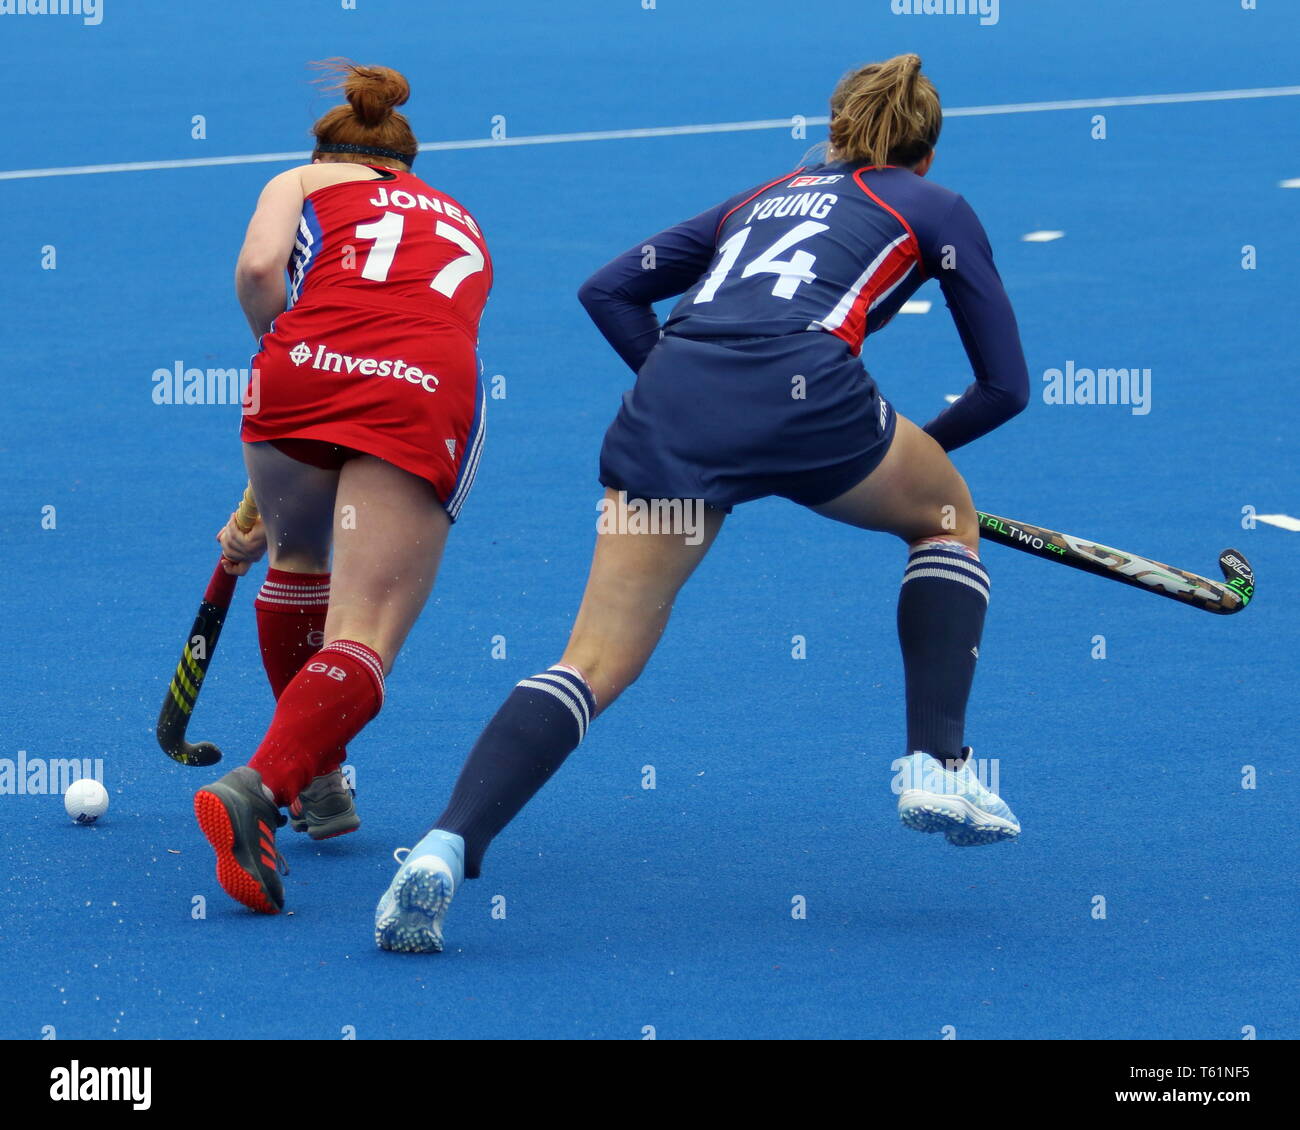 Sarah Jones (GBR) defending off Julia Young (USA) in the 2019 FIH Pro League Great Britain v United States women’s hockey match at the Olympic Park Stock Photo